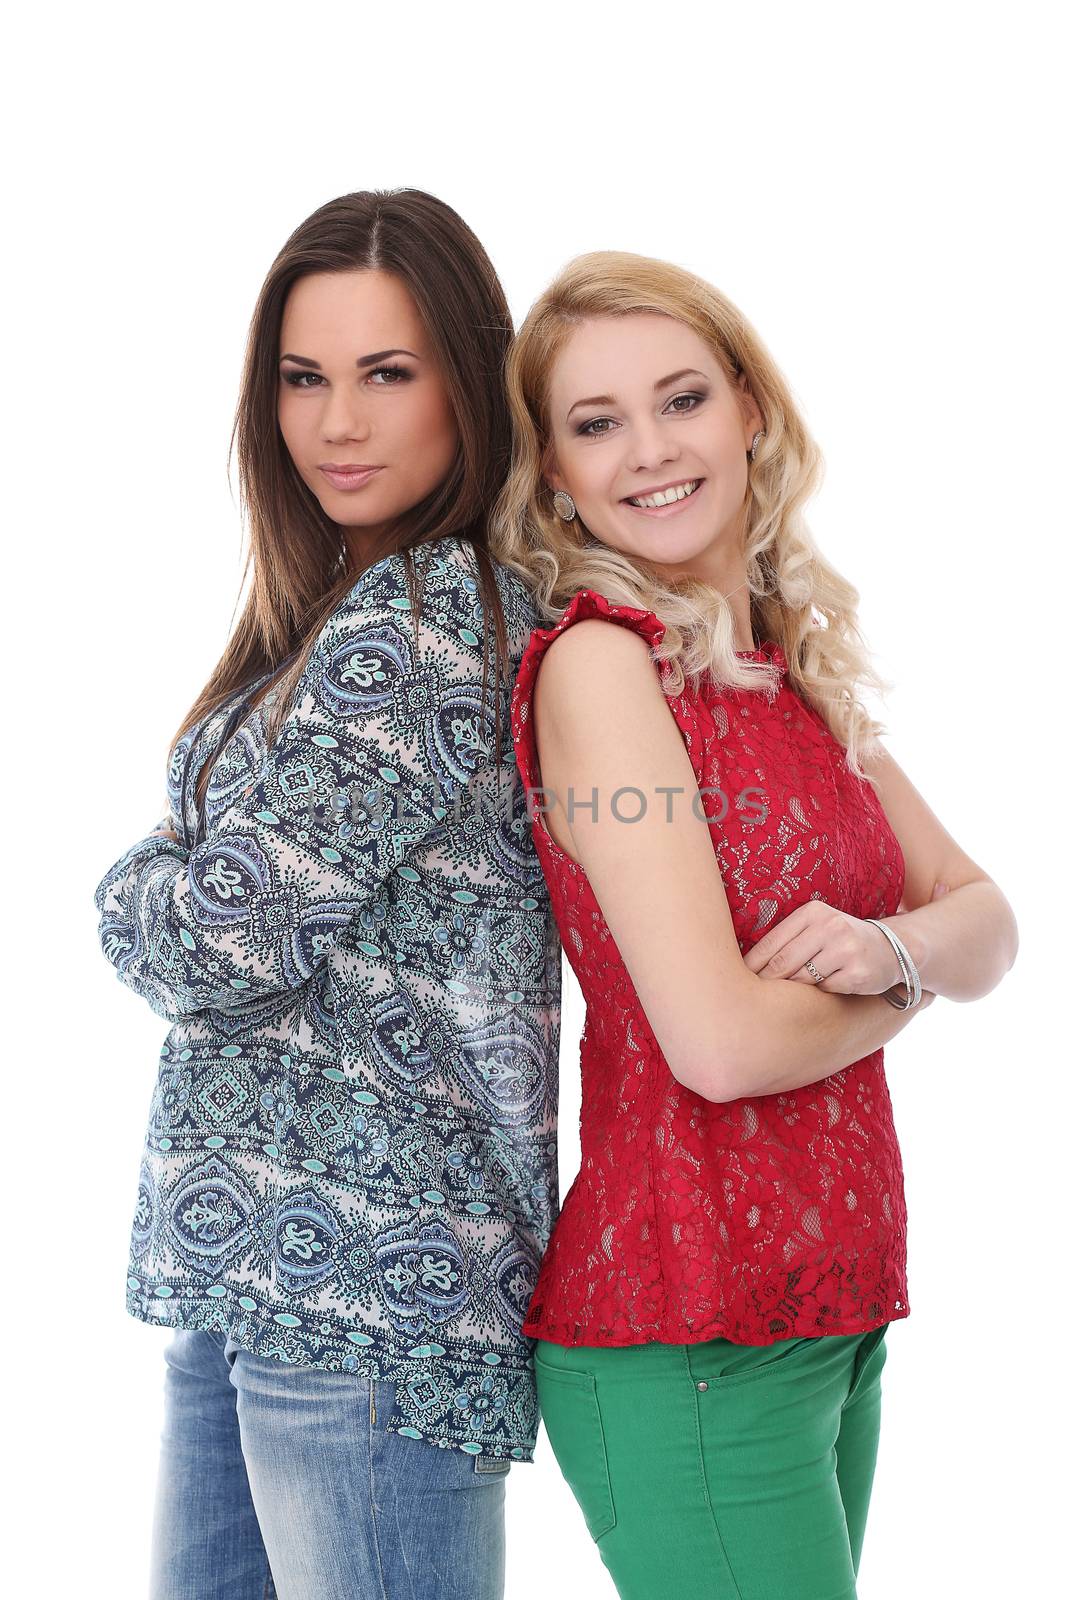 A brunette and a blonde girls are posing over a white background